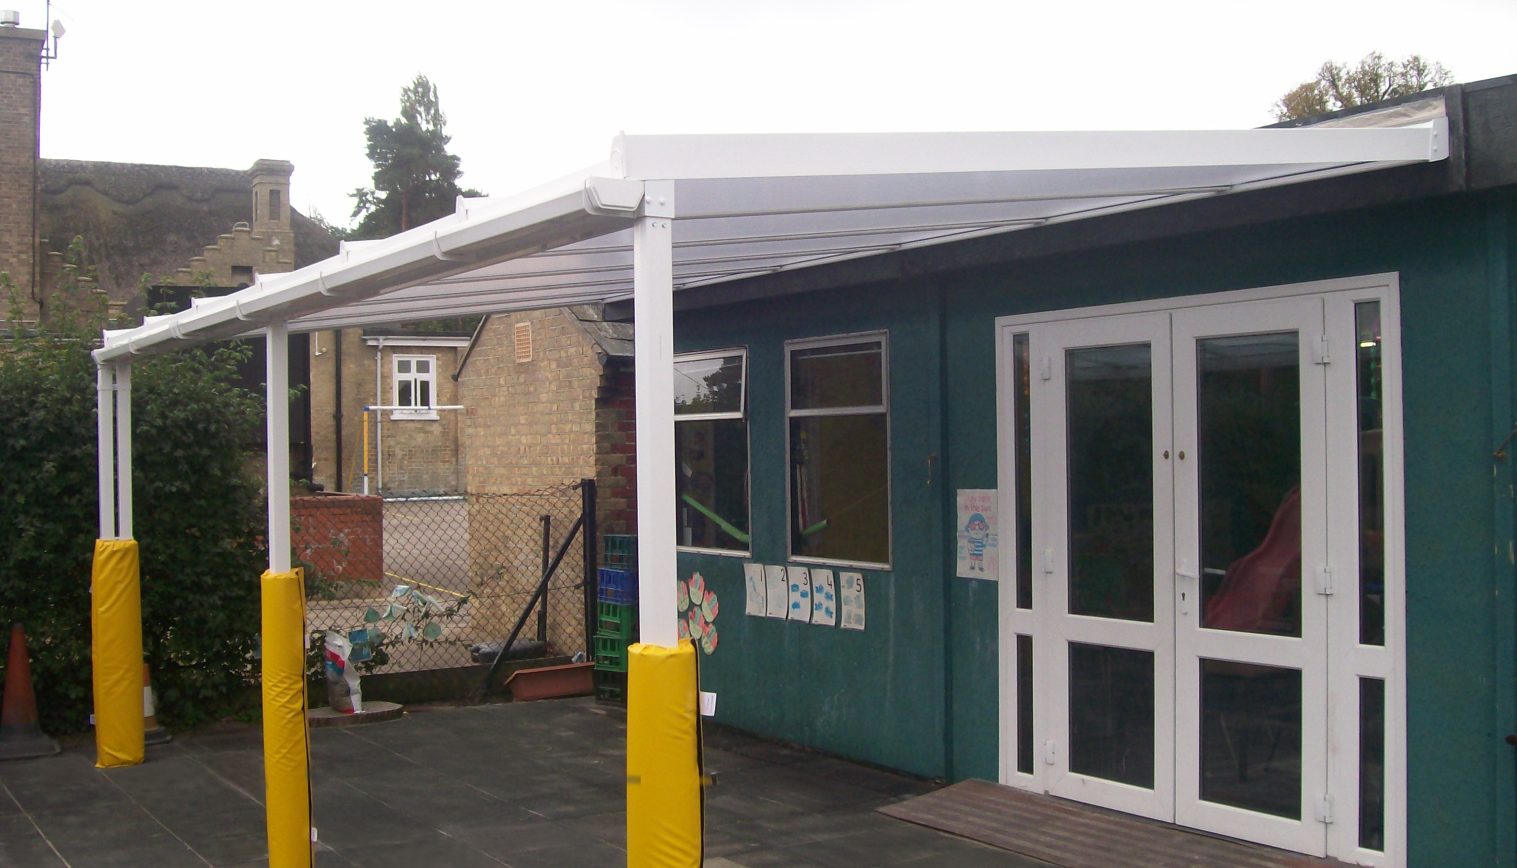 Benhall St Mary’s Pre School – Wall Mounted Canopy